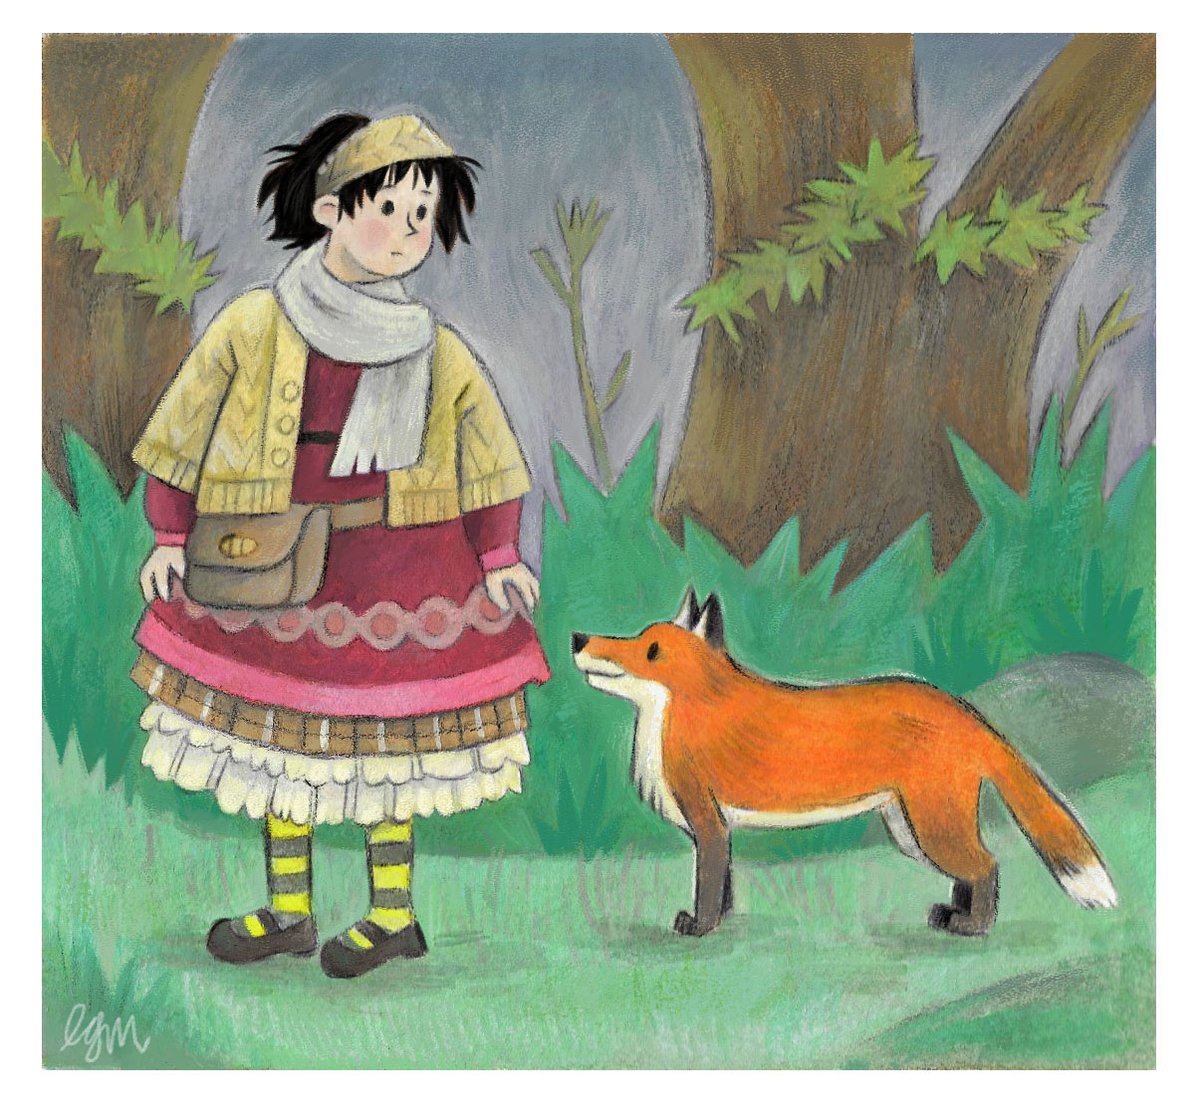 🌳🌲🦉If you got lost in the woods and met a fox who told you they would show you the way, would you follow them? 🦊🌲🌳

-----
#artistsontwitter #watercolour #kidlitillustration #kidlitart #morikei #morigirl #foxillustration #woodlandanimals #woodlandwalk